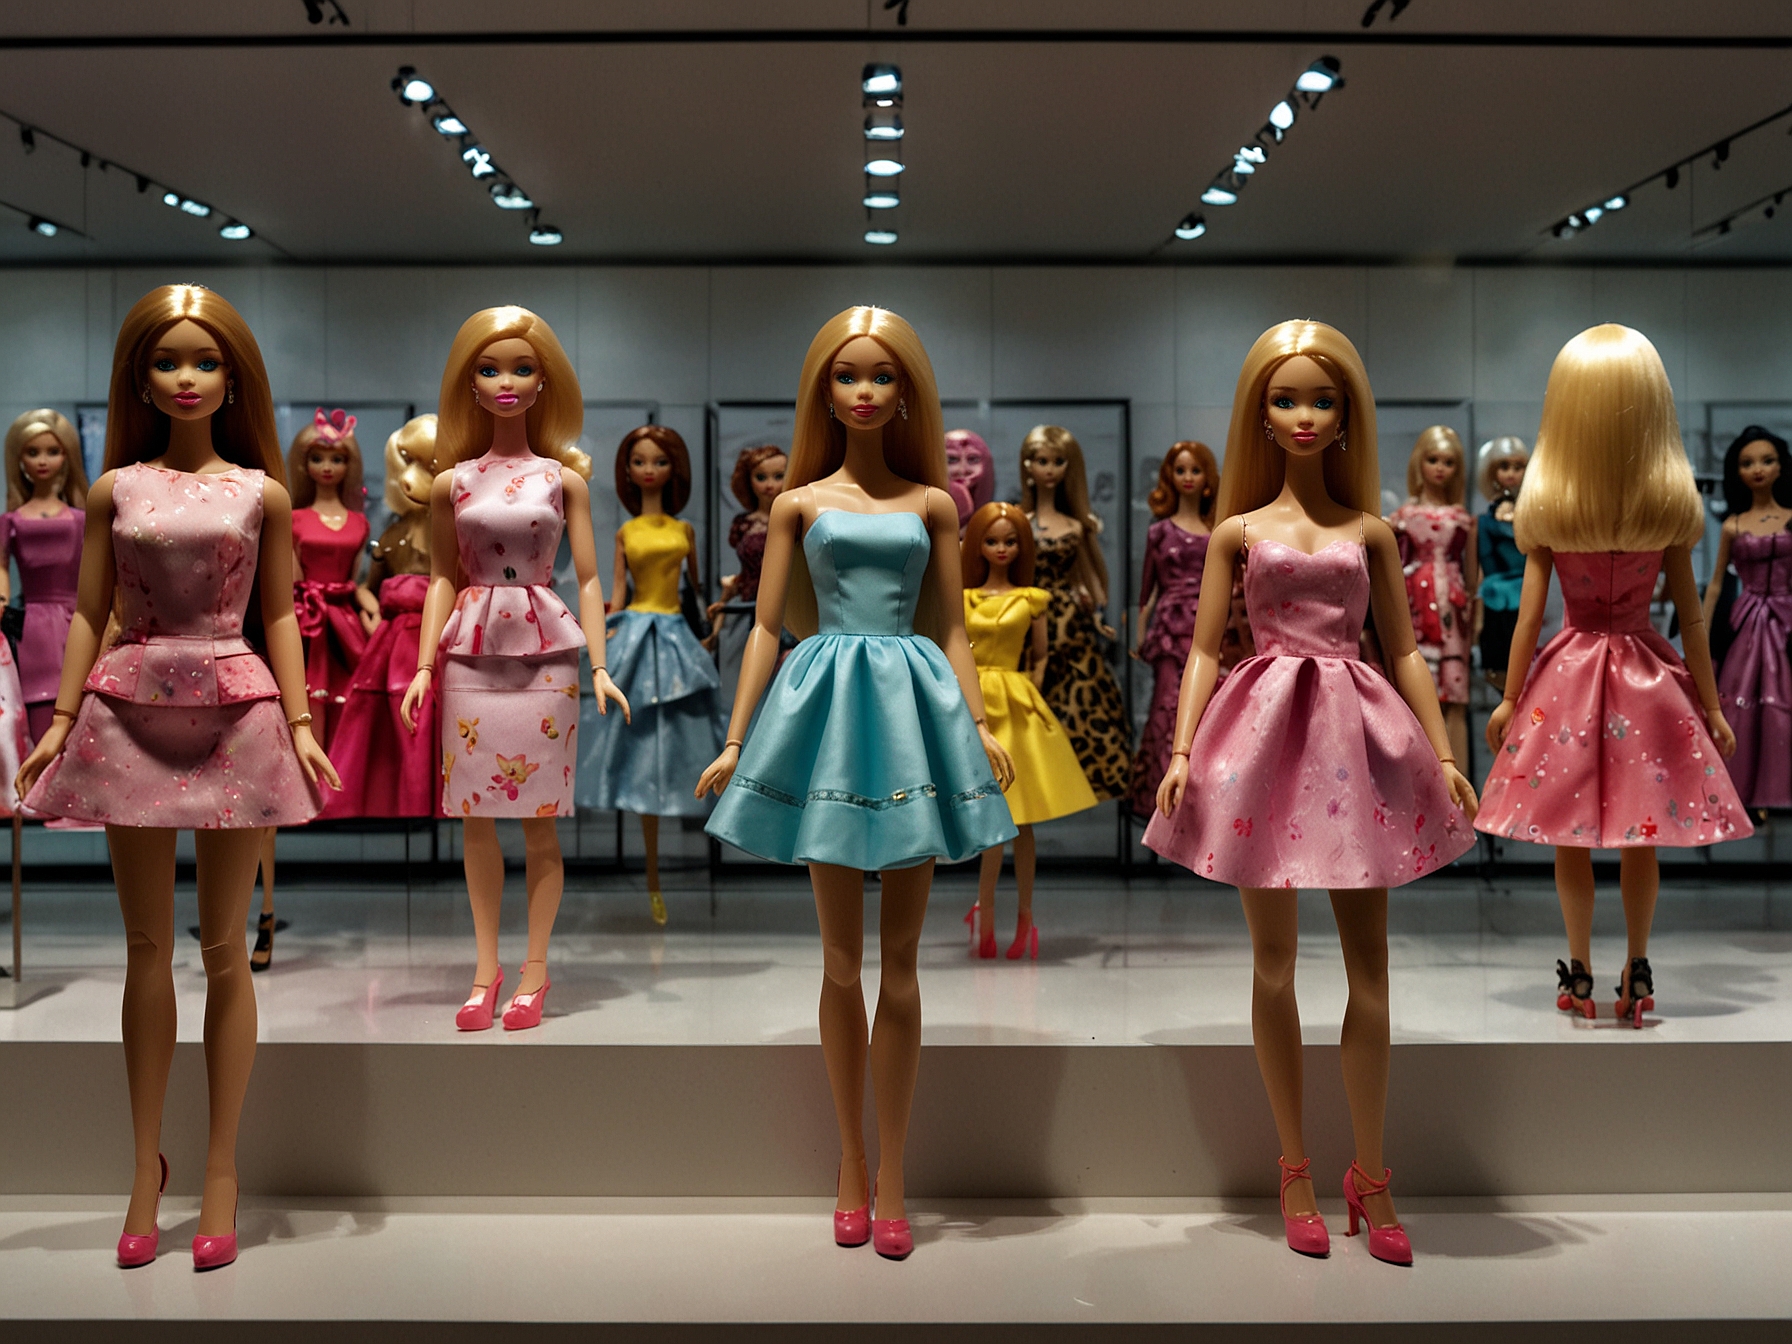 A panoramic view of the Barbie exhibit at the Design Museum, featuring a display of diverse Barbie dolls from different eras, showcasing fashion trends and technological innovations.